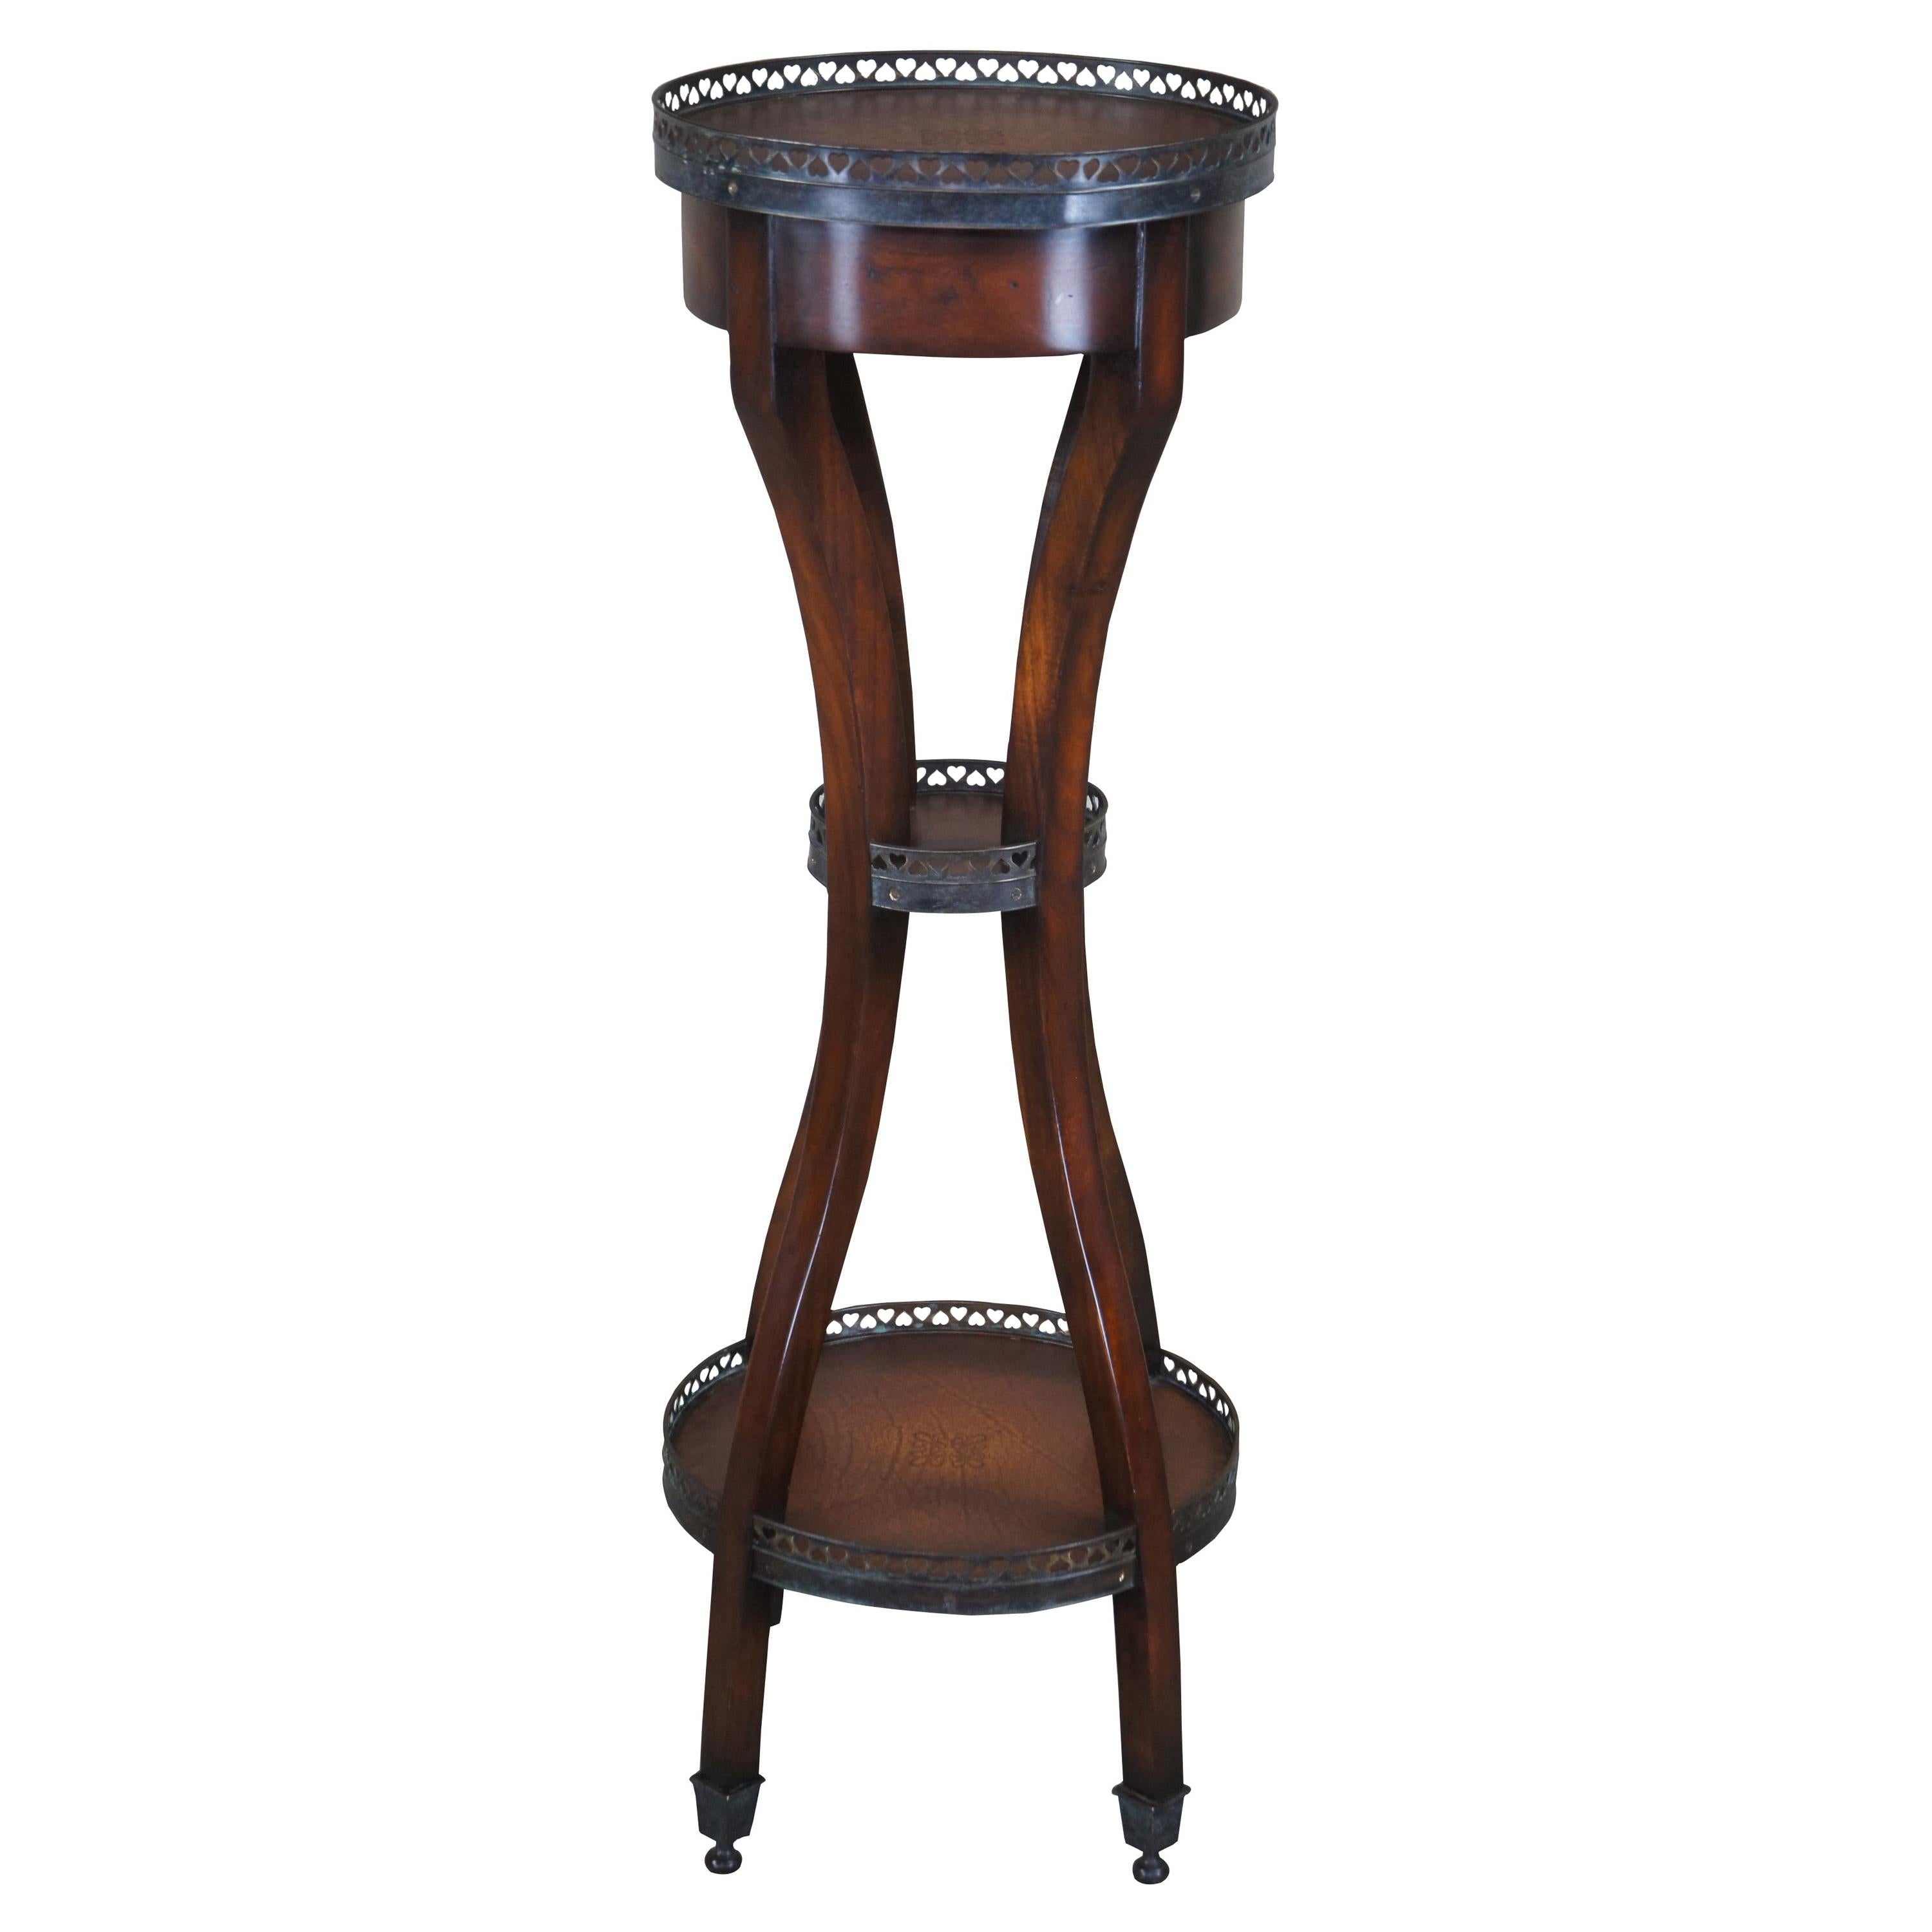 Theodore Alexander Mahogany & Tooled Leather 3 Tier Pedestal Stand Display Table